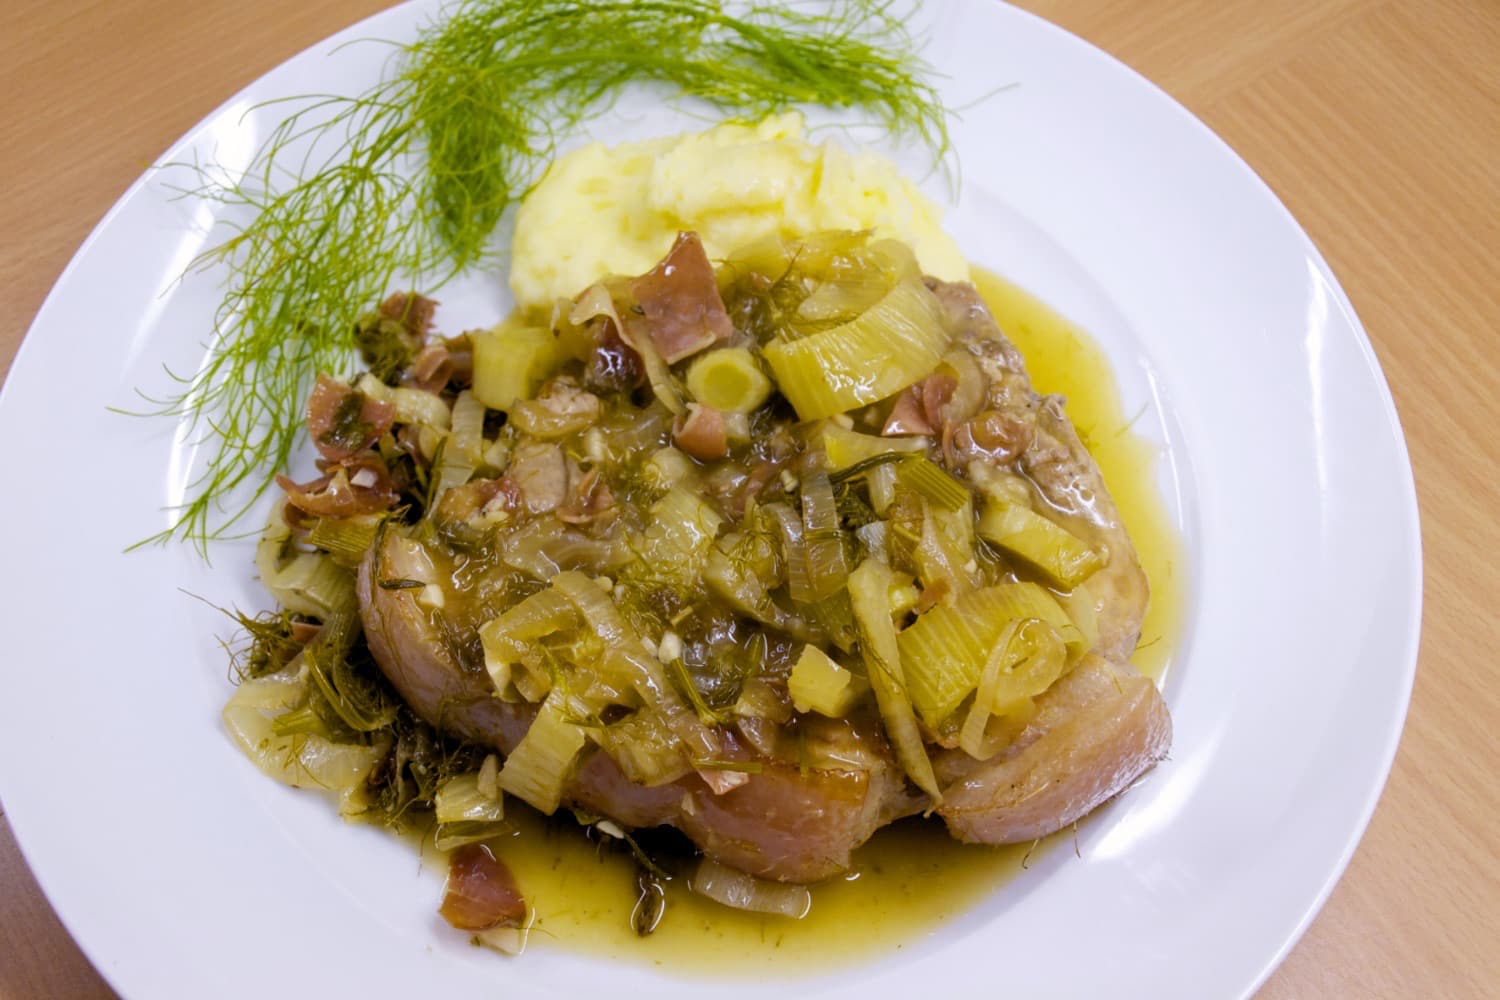 Iron Age Pork Chops with Fennel and Apple